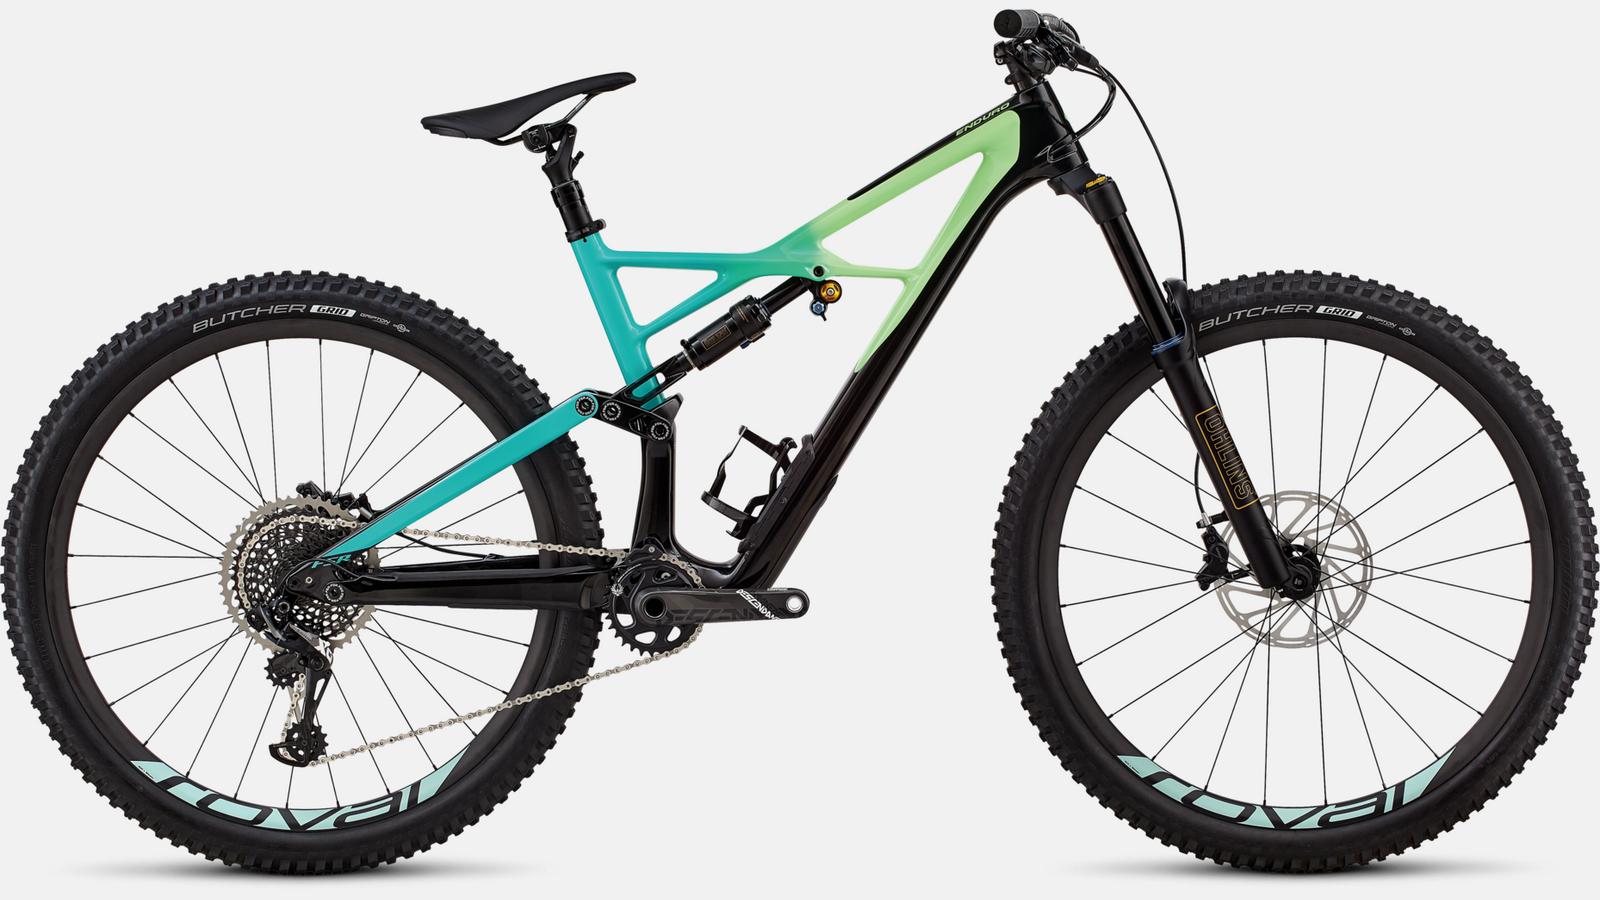 Touch-up paint for 2018 Specialized Enduro Pro 29/6Fattie - Gloss Black